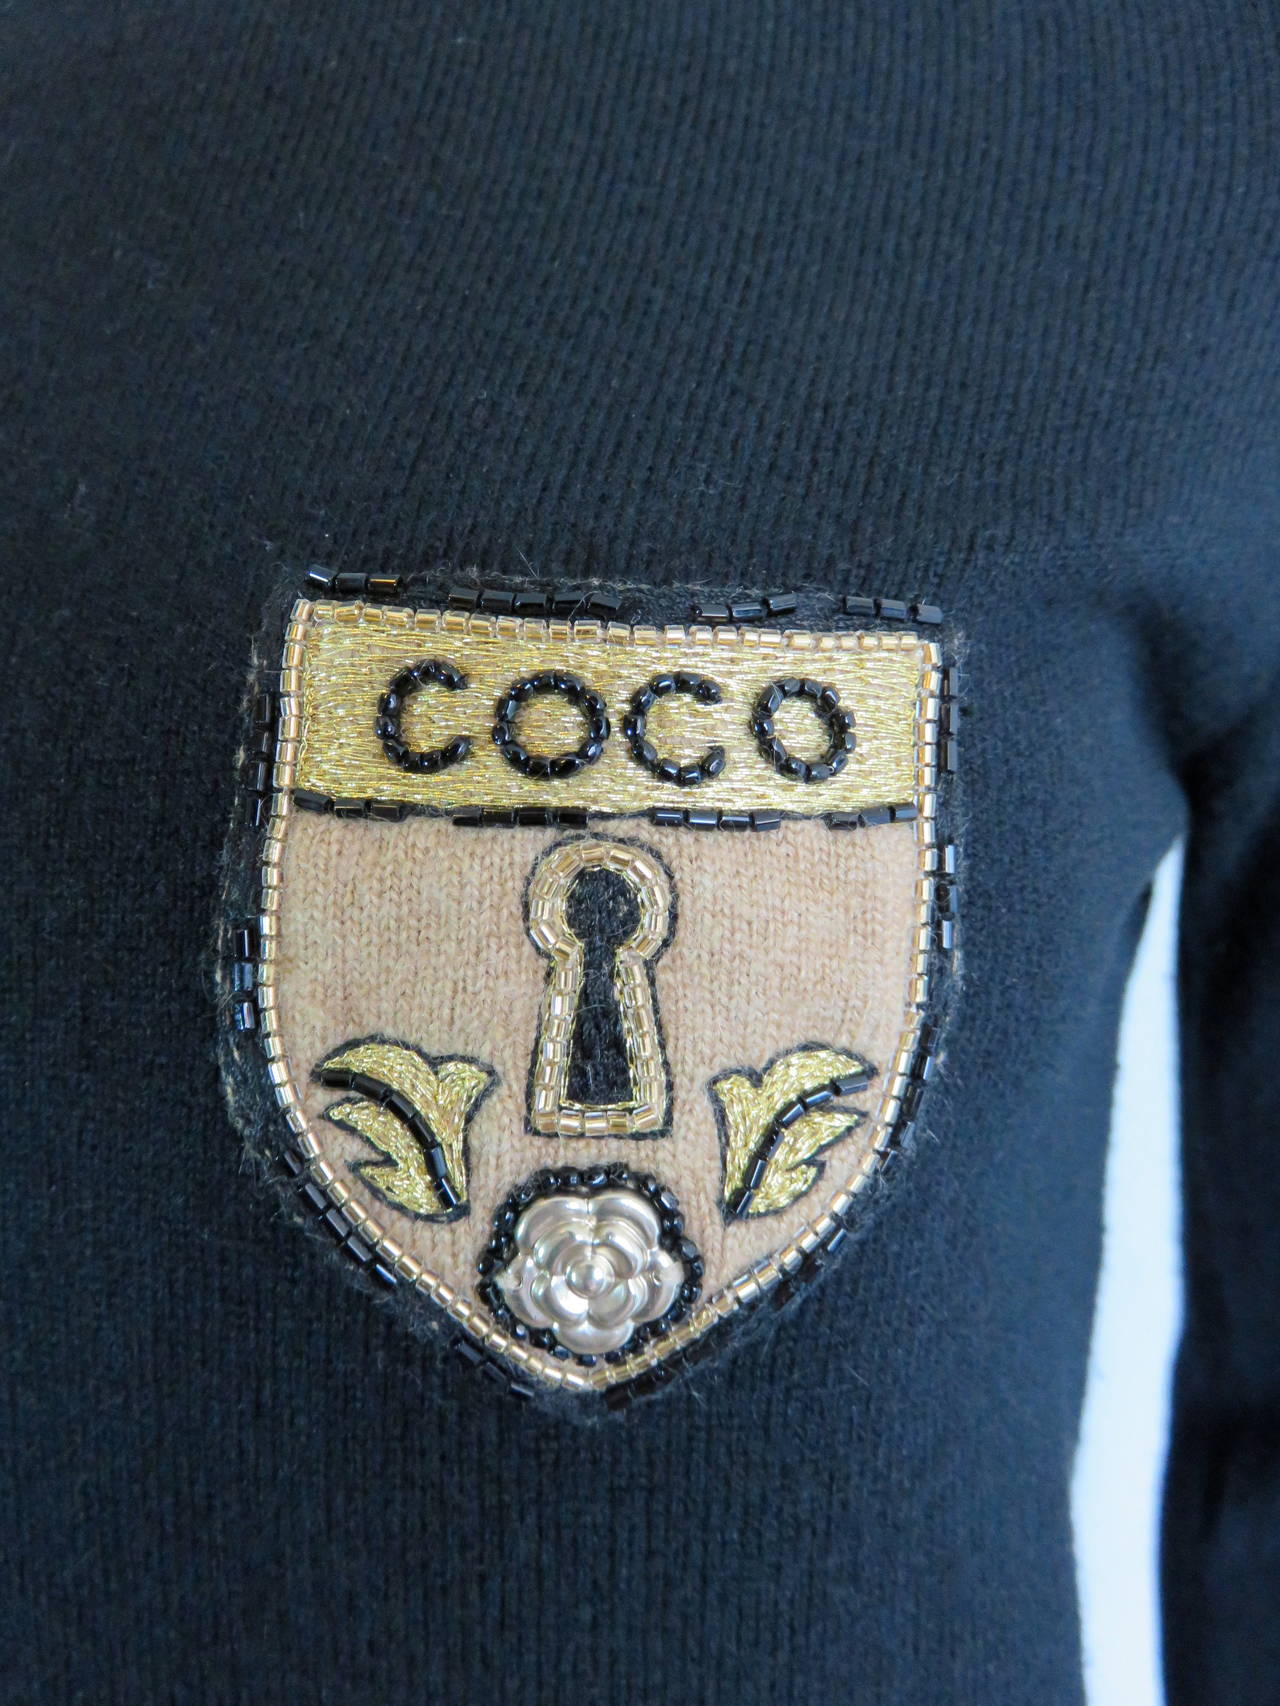 Excellent condition, CHANEL PARIS, pure cashmere sweater with embellished 'COCO' shield patch at the left chest.  

Crew-neck style sweater in black with beige contrast rib at neckline, and dual cuffs.

The matching, cashmere knit patch is